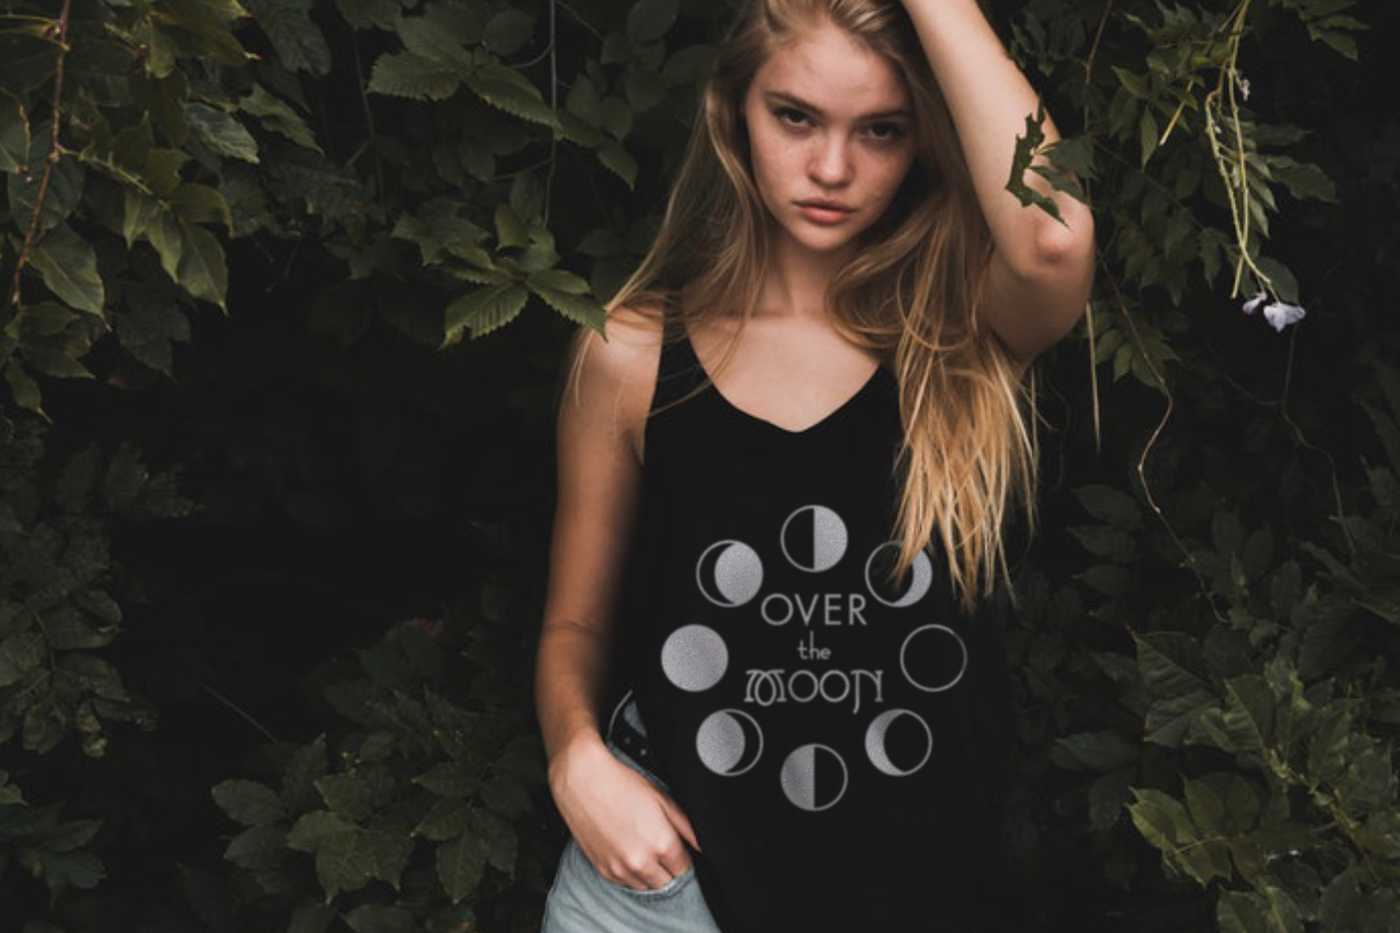 White woman in a tank top that has the phases of the moon with the text "Over the moon."